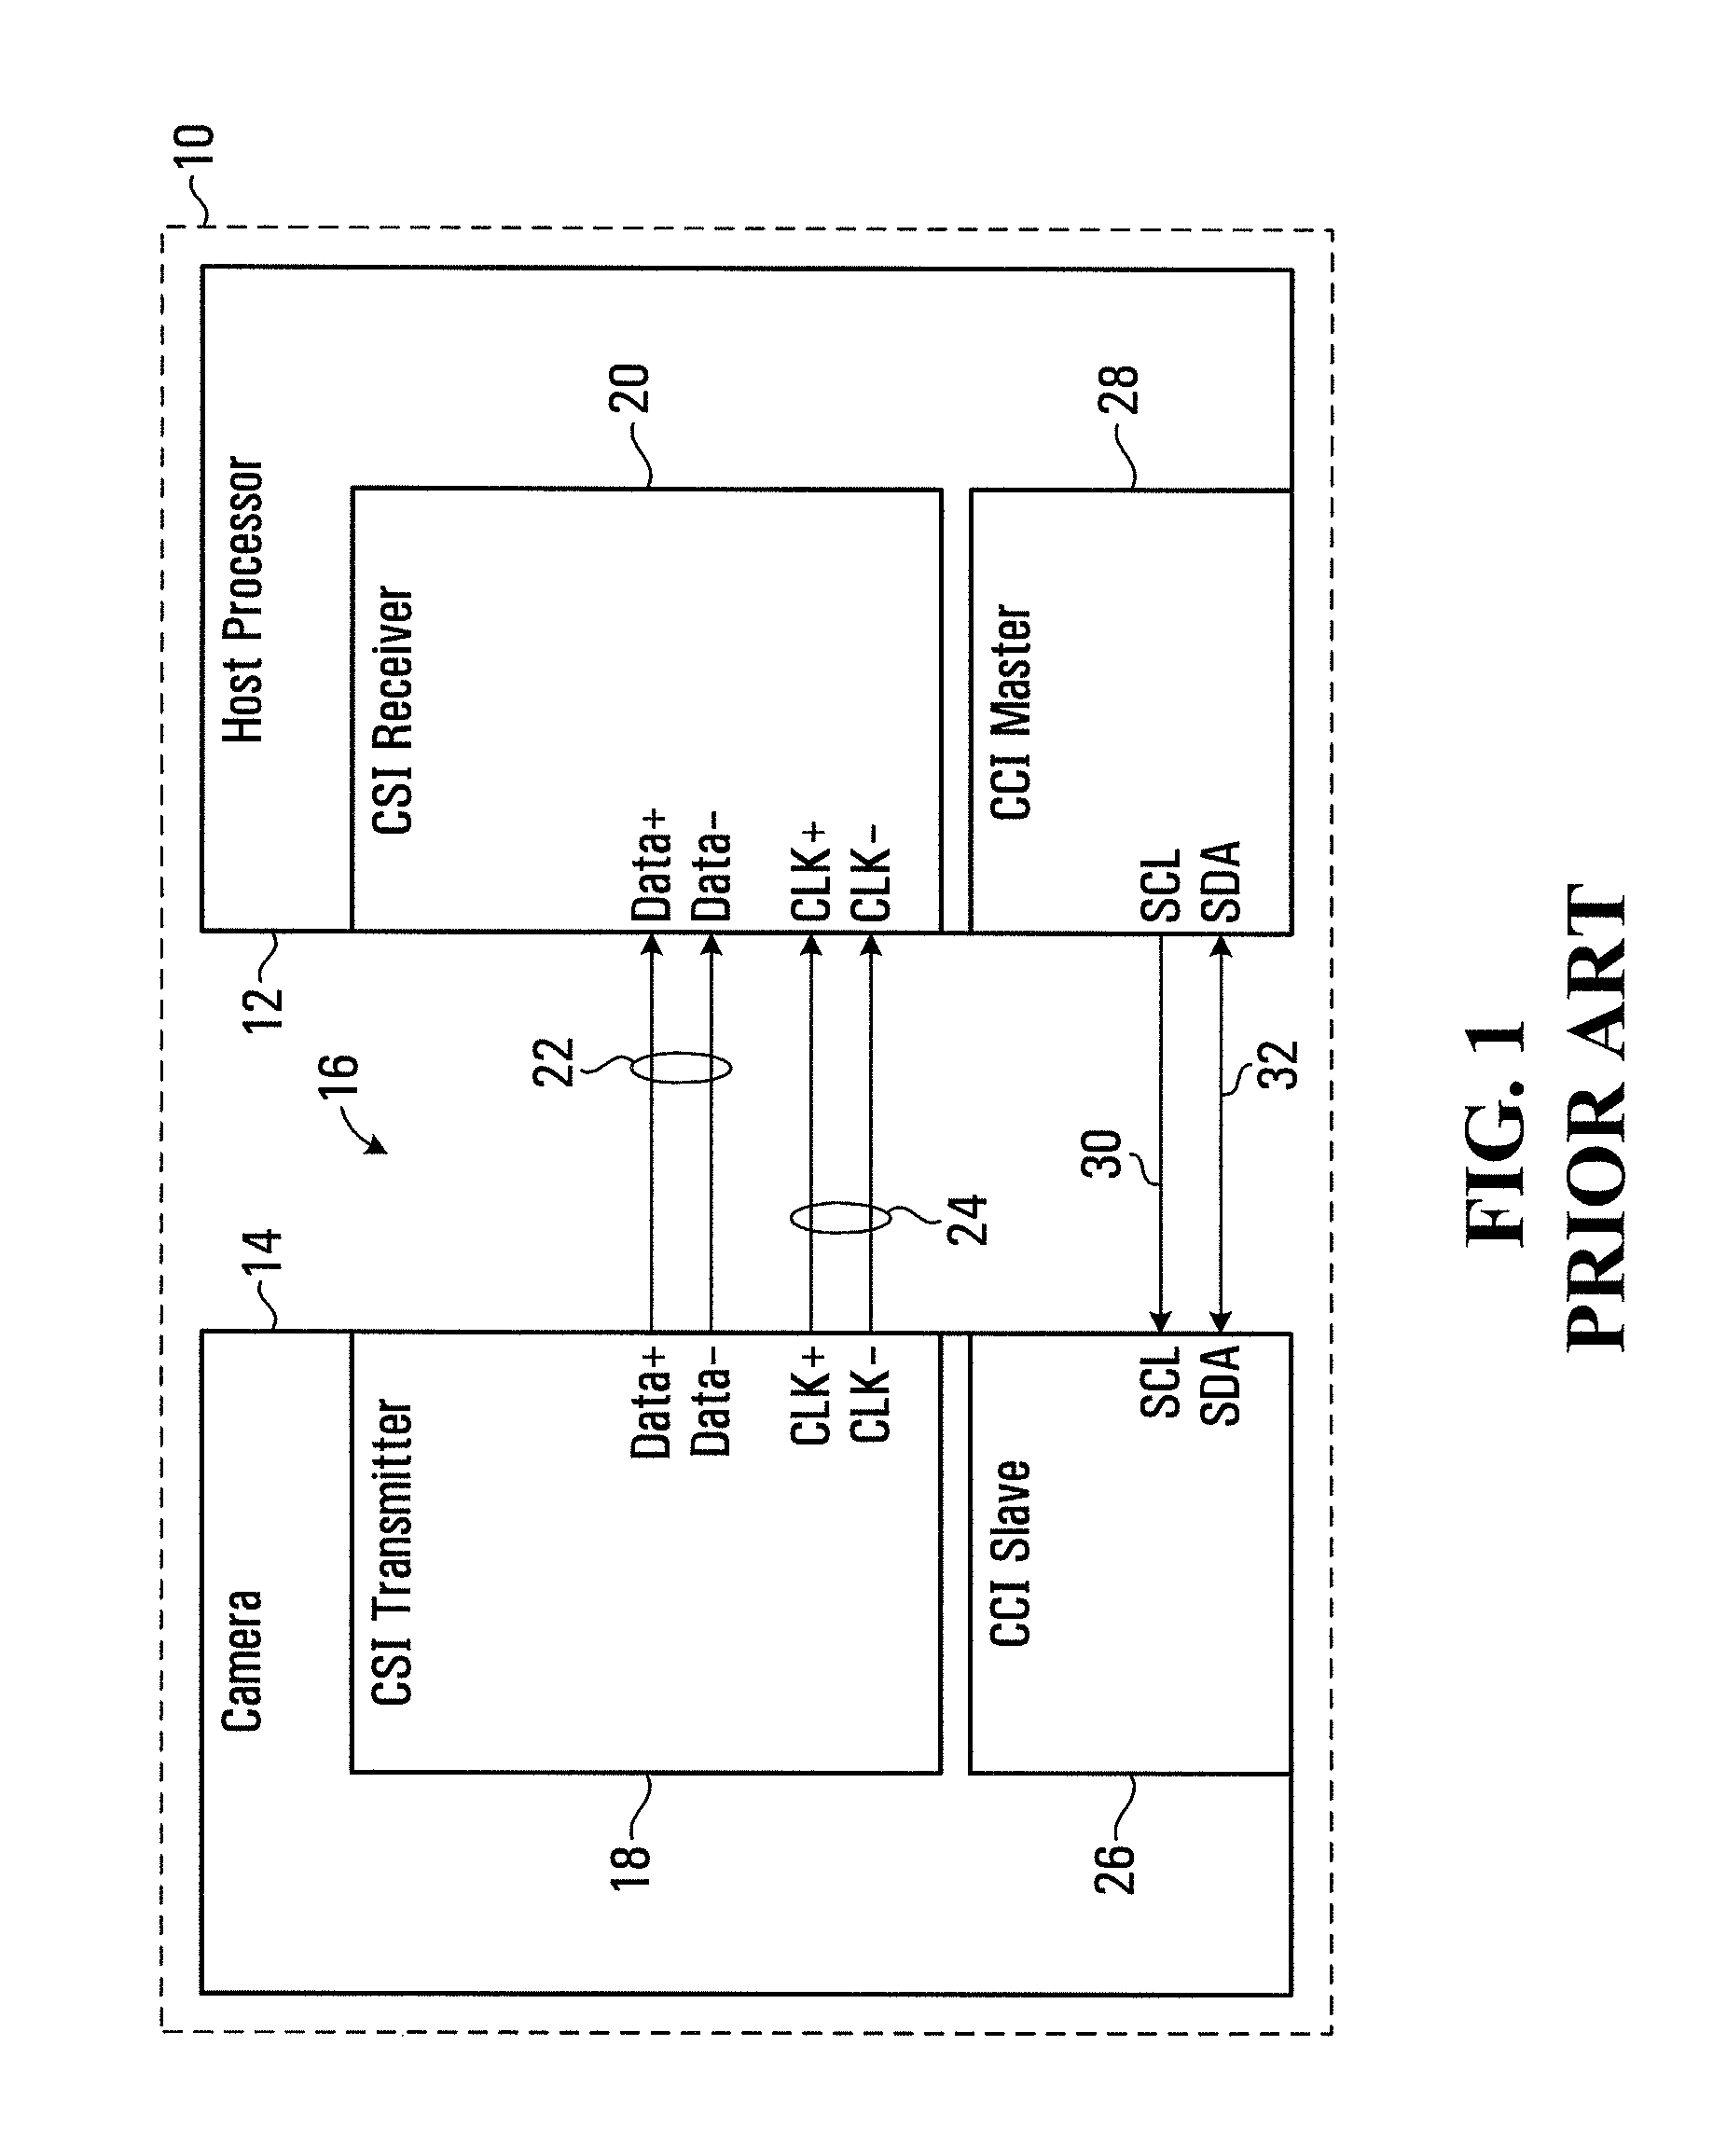 Graphics multi-media IC and method of its operation